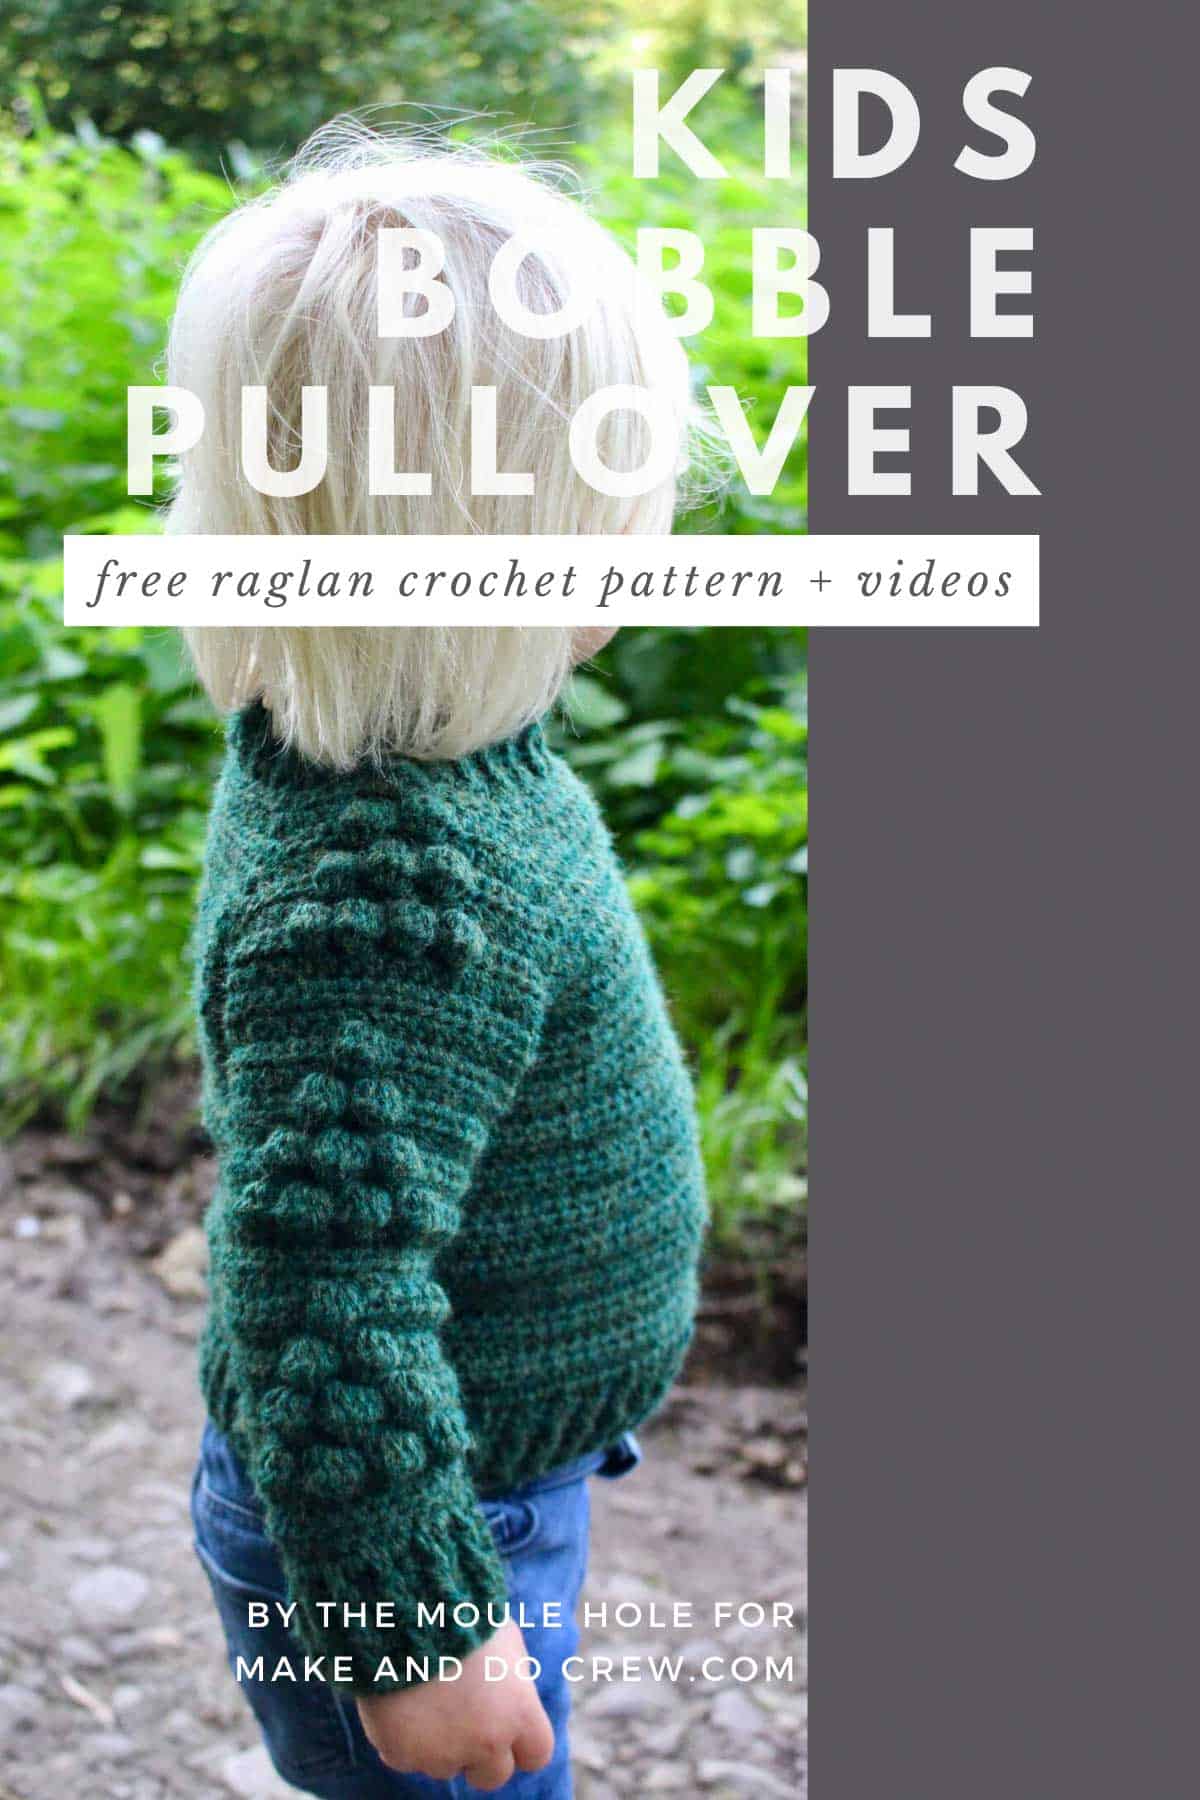 Toddler boy standing looking at green meadow wearing a pullover crochet sweater with a tree bobble motif on the sleeves.